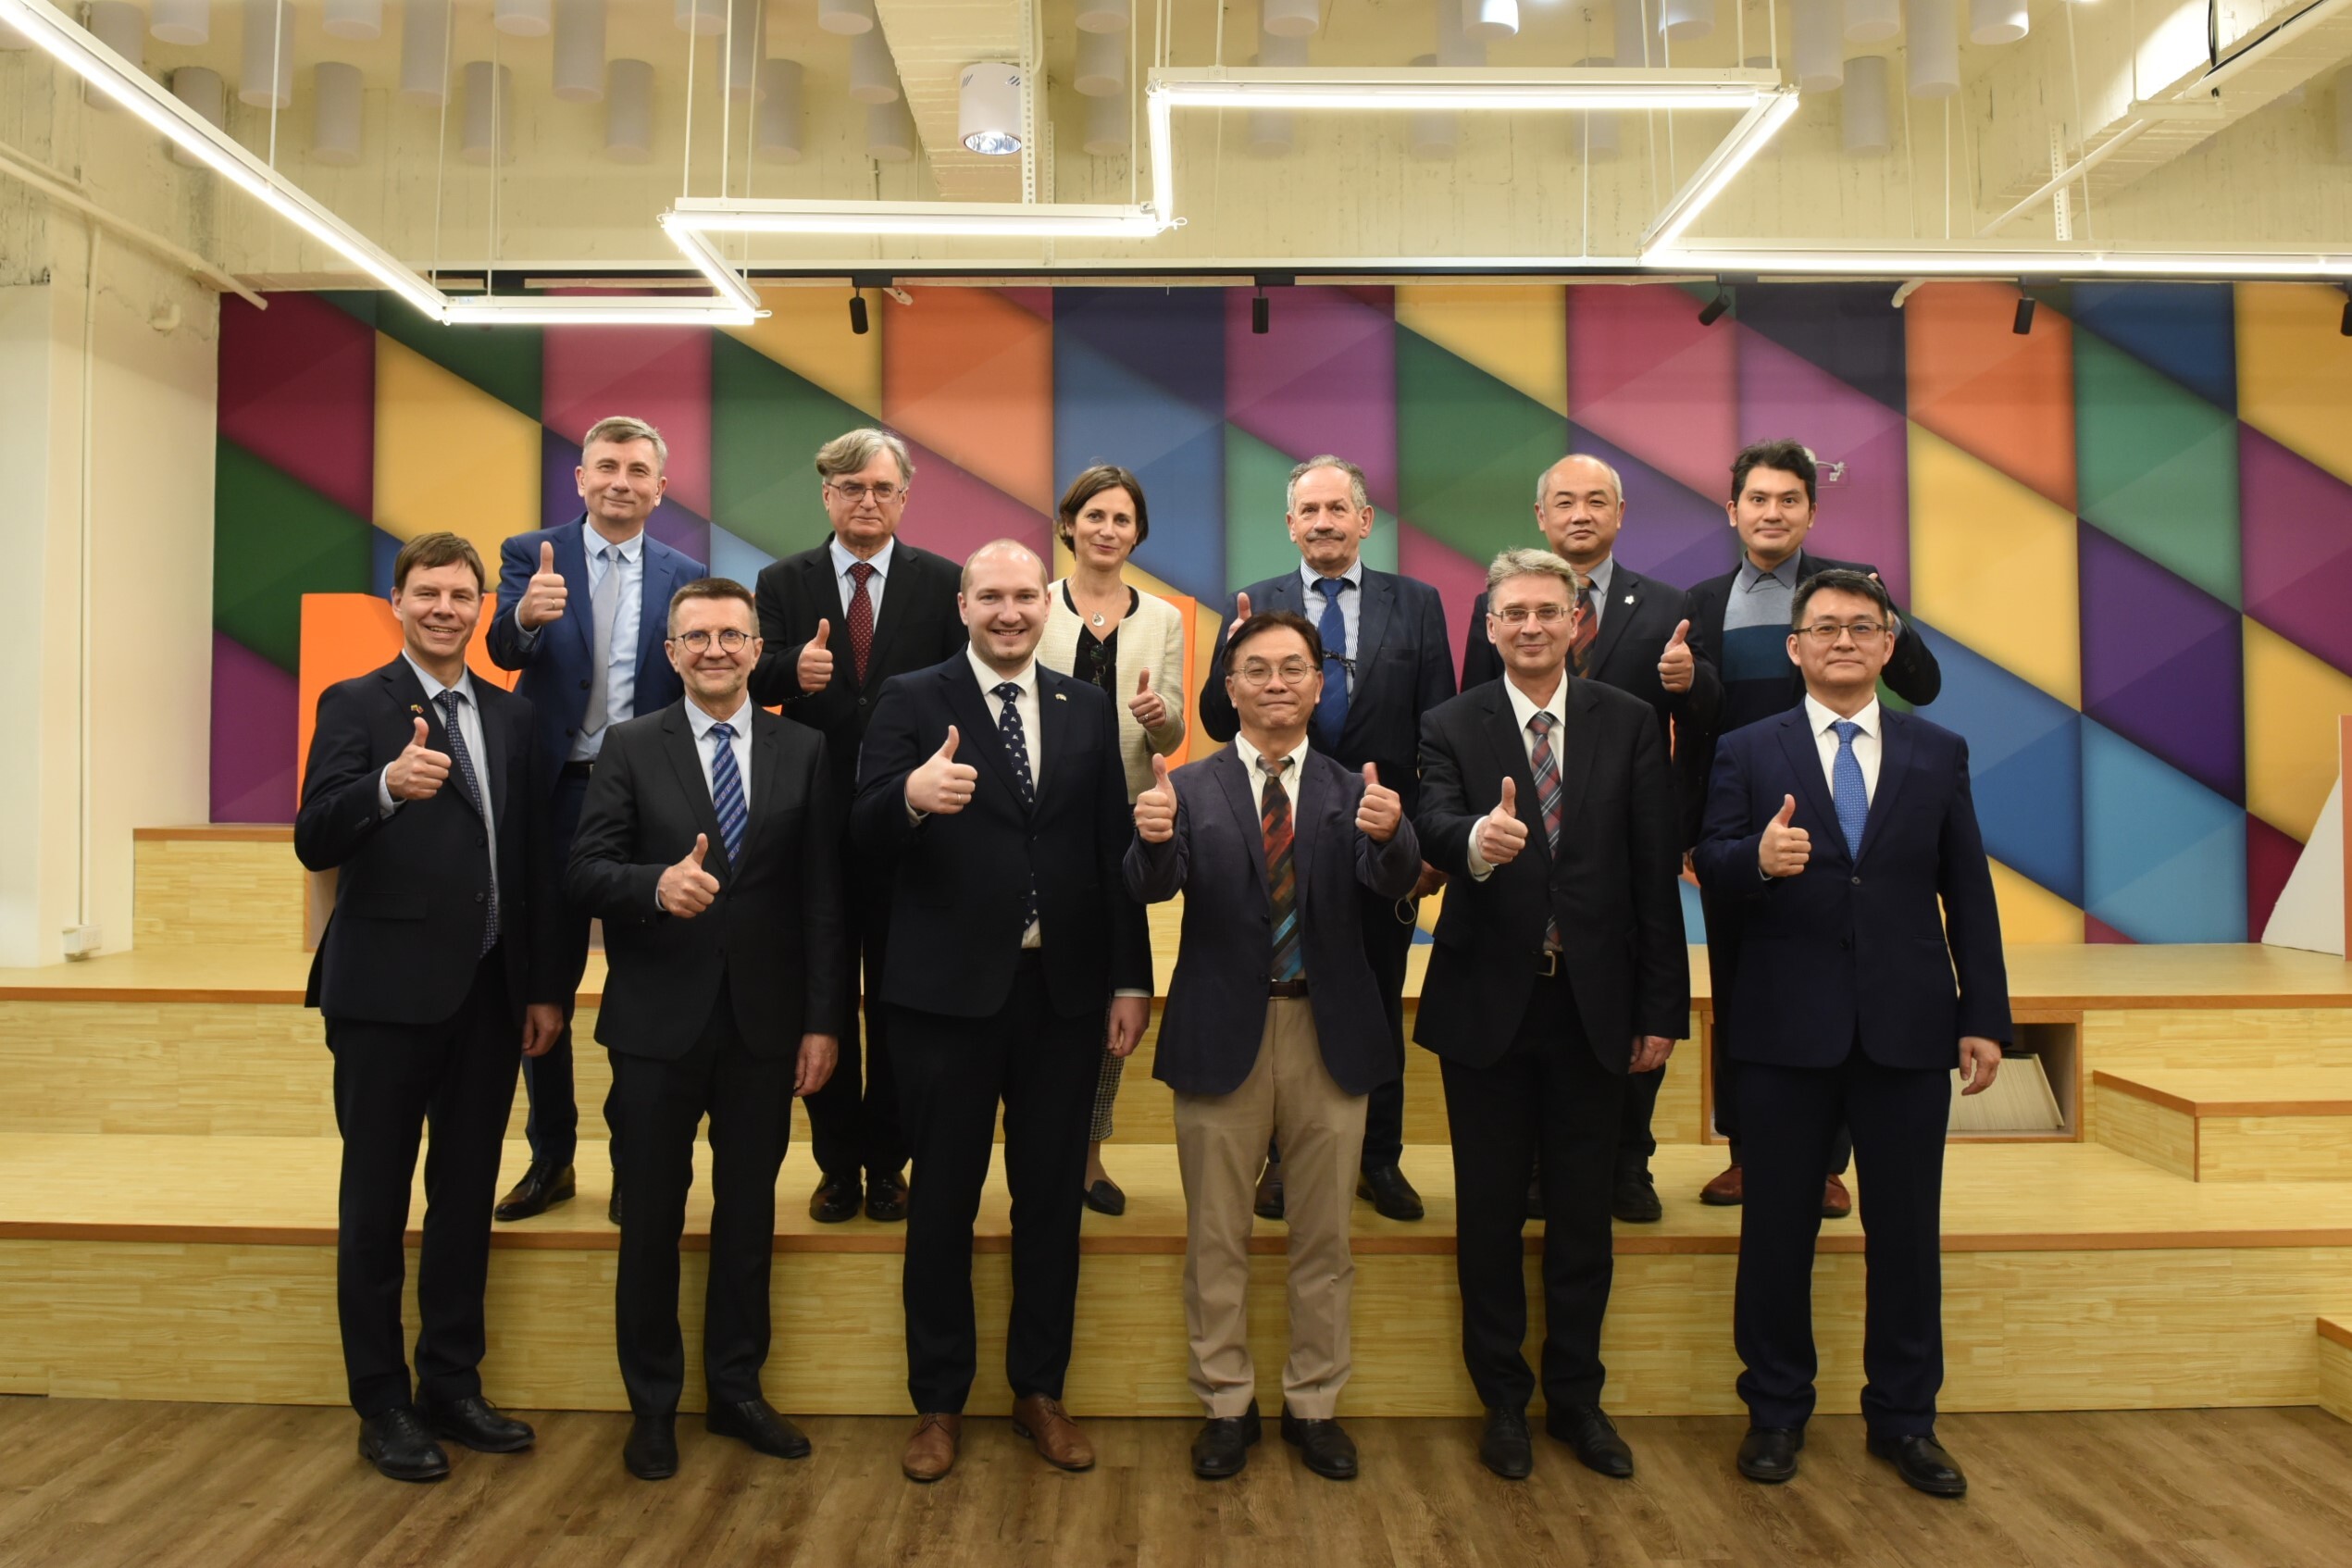 The Lithuanian delegation visited NCKU's Innovation Headquarters, where Executive Vice President Woei-Jer Chuang (front row, third from the right) welcomed them.